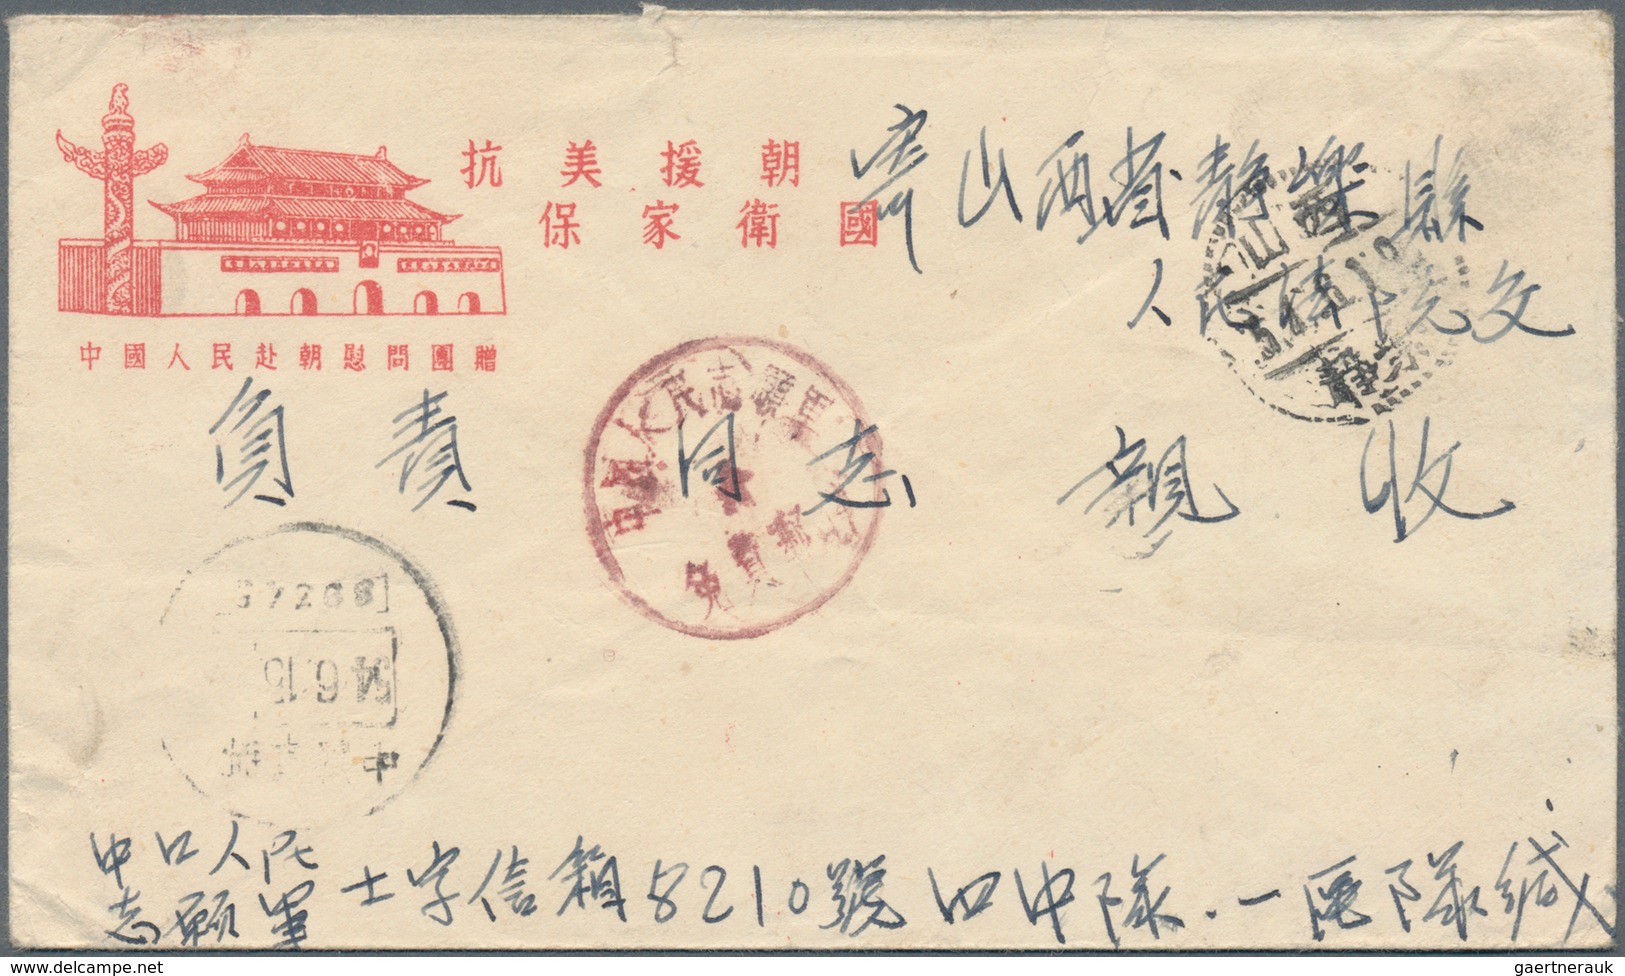 China - Militärpostmarken: 1947/54, 6 military post covers, 2 from the Republic era and 4 from the P